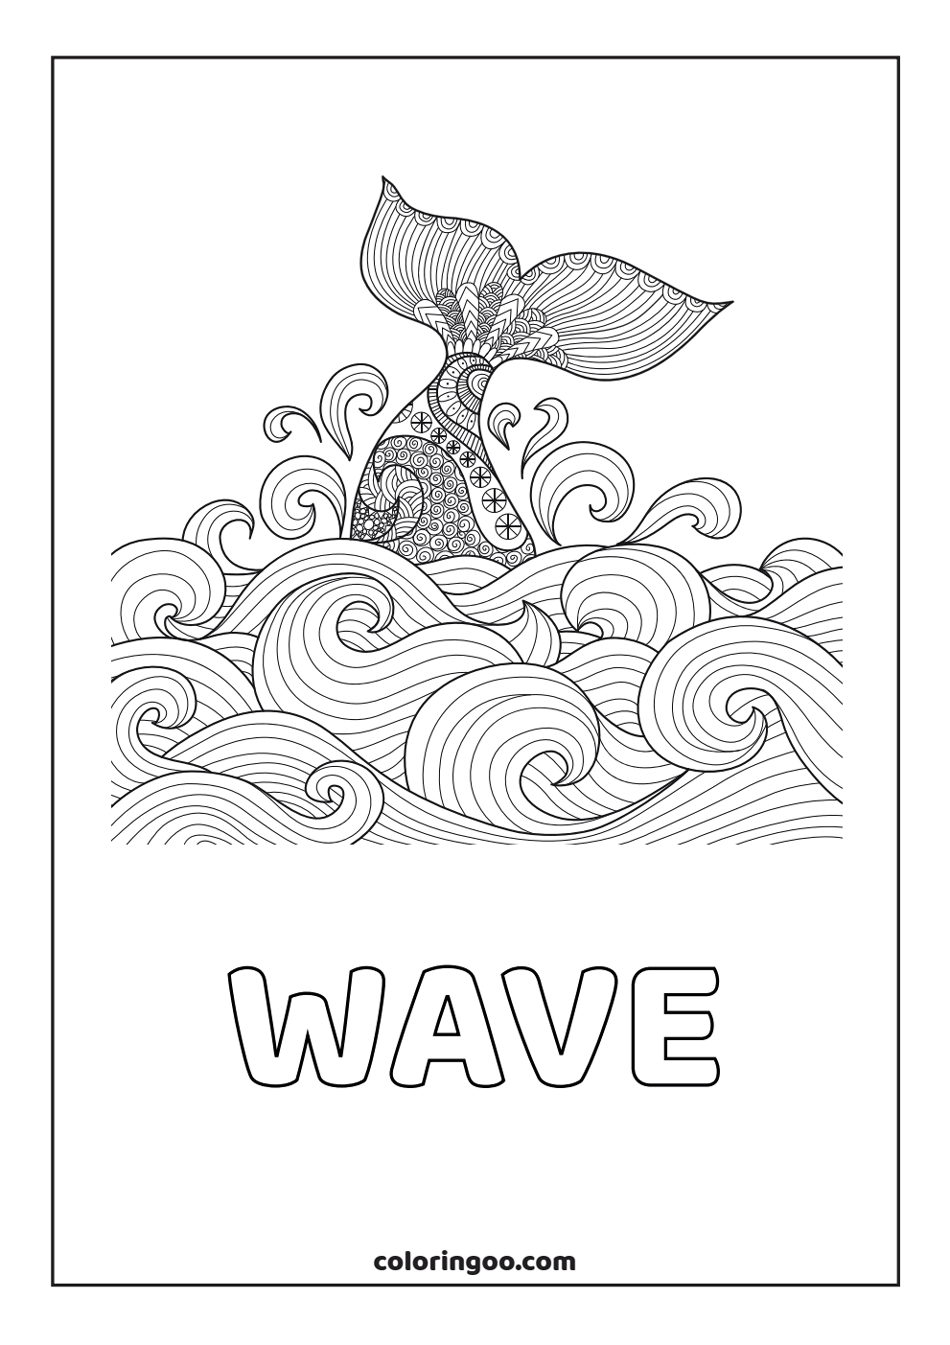 wave coloring pages for adults